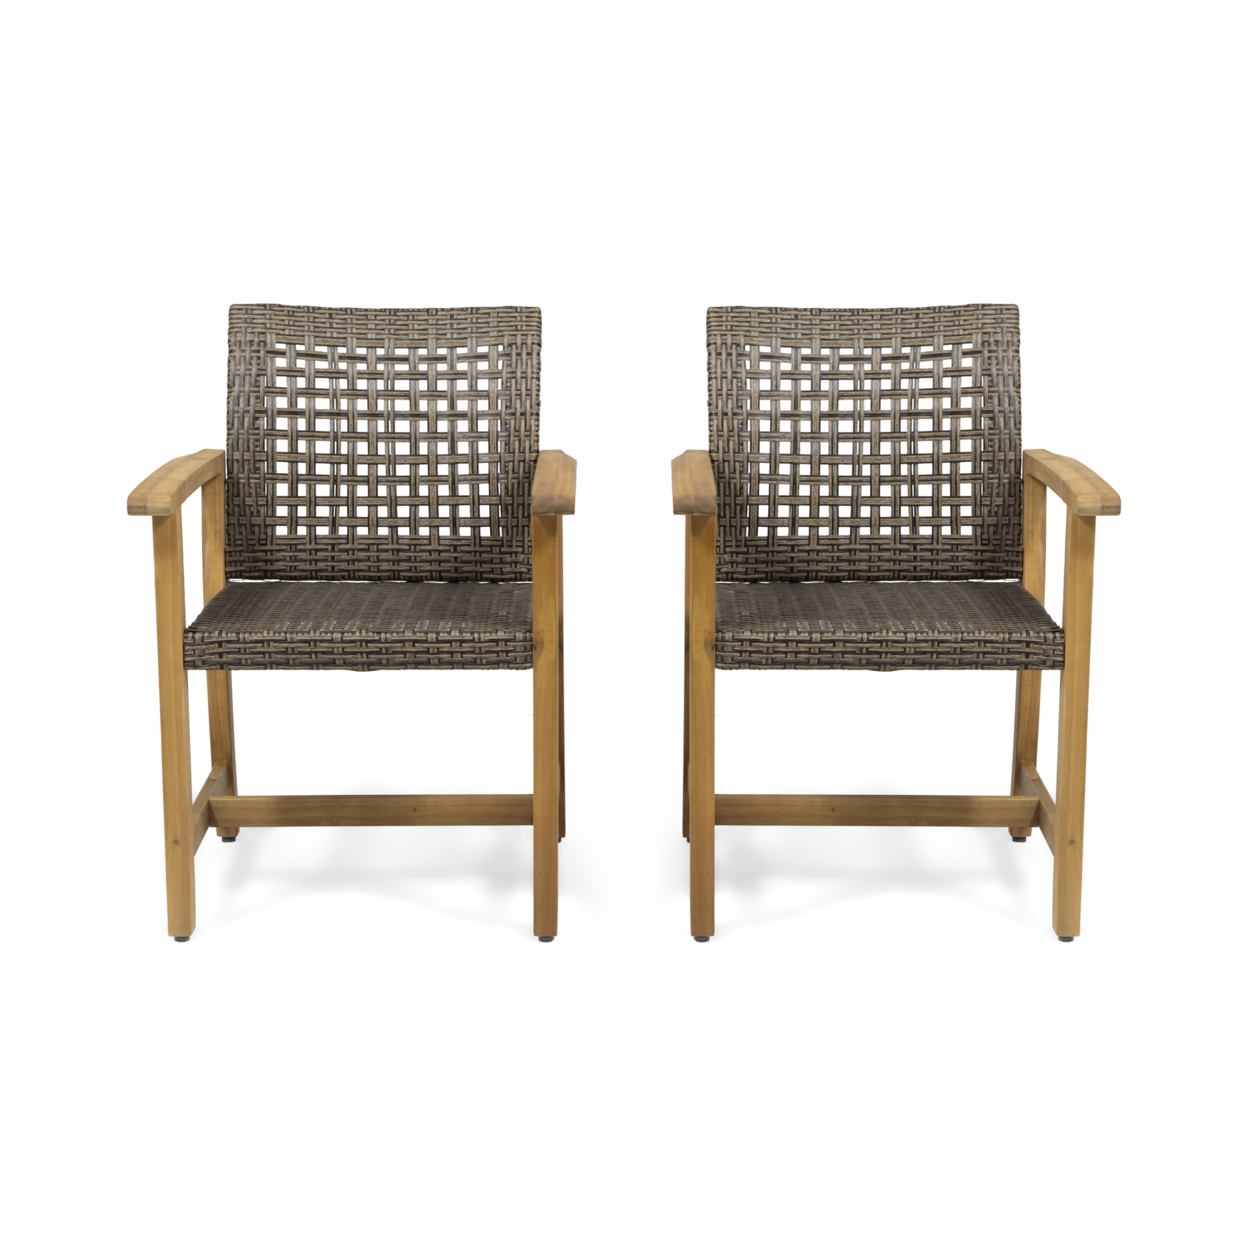 Olivia Outdoor Acacia Wood Dining Chair (Set Of 2)